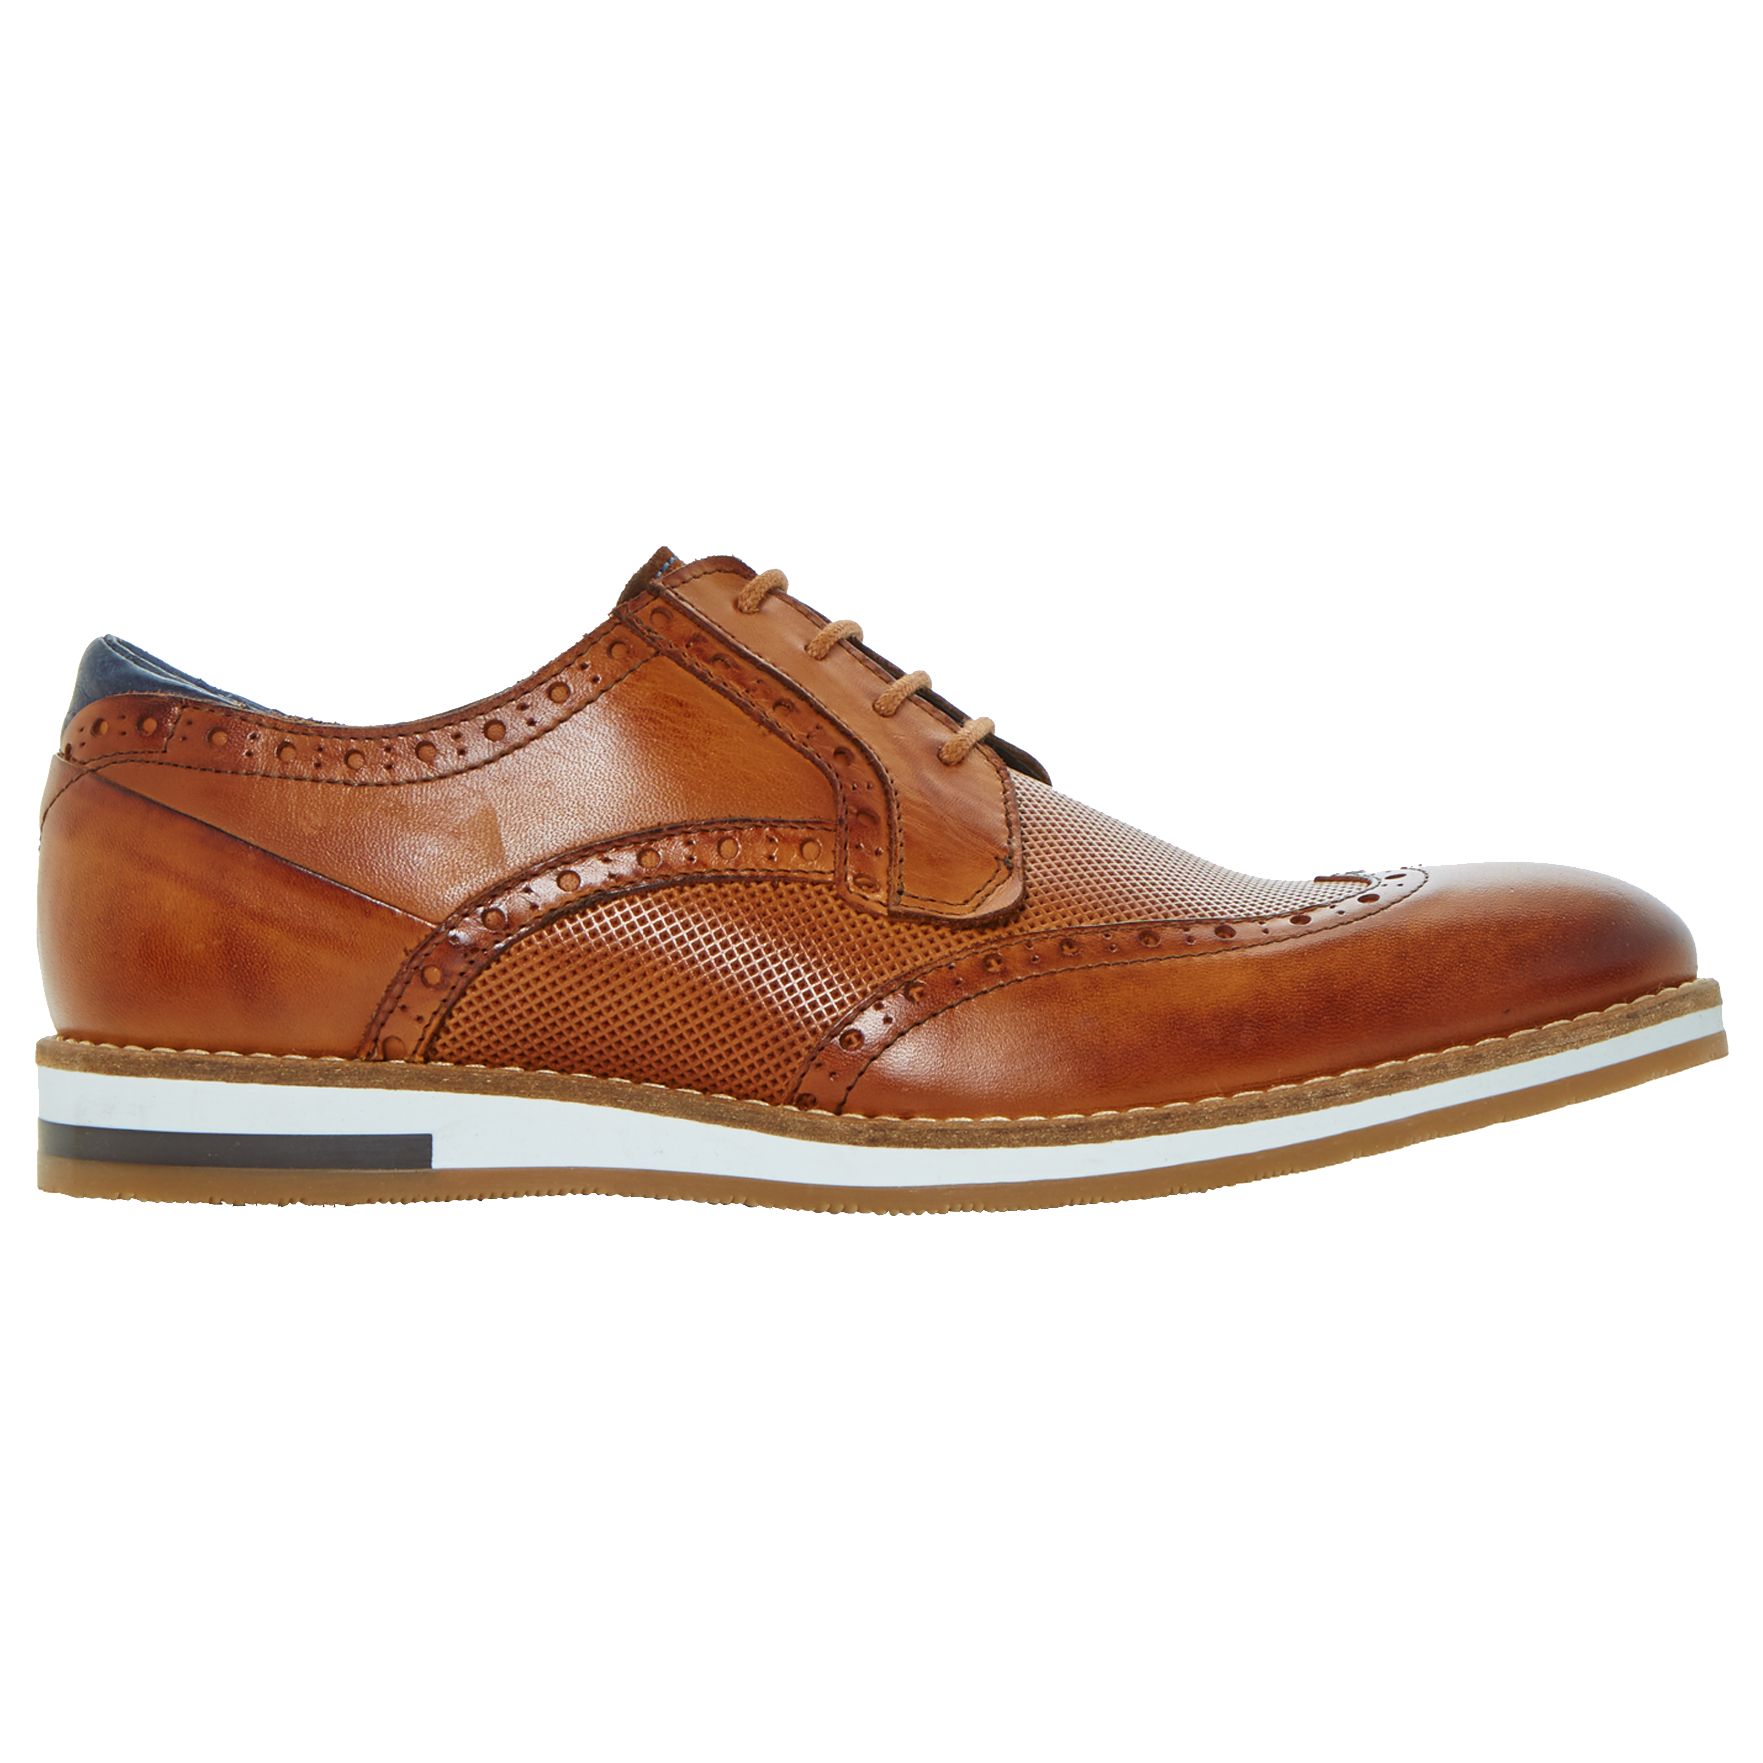 Bertie Baker Hill Gibson Leather Wingtip Shoes, Tan Leather, 11